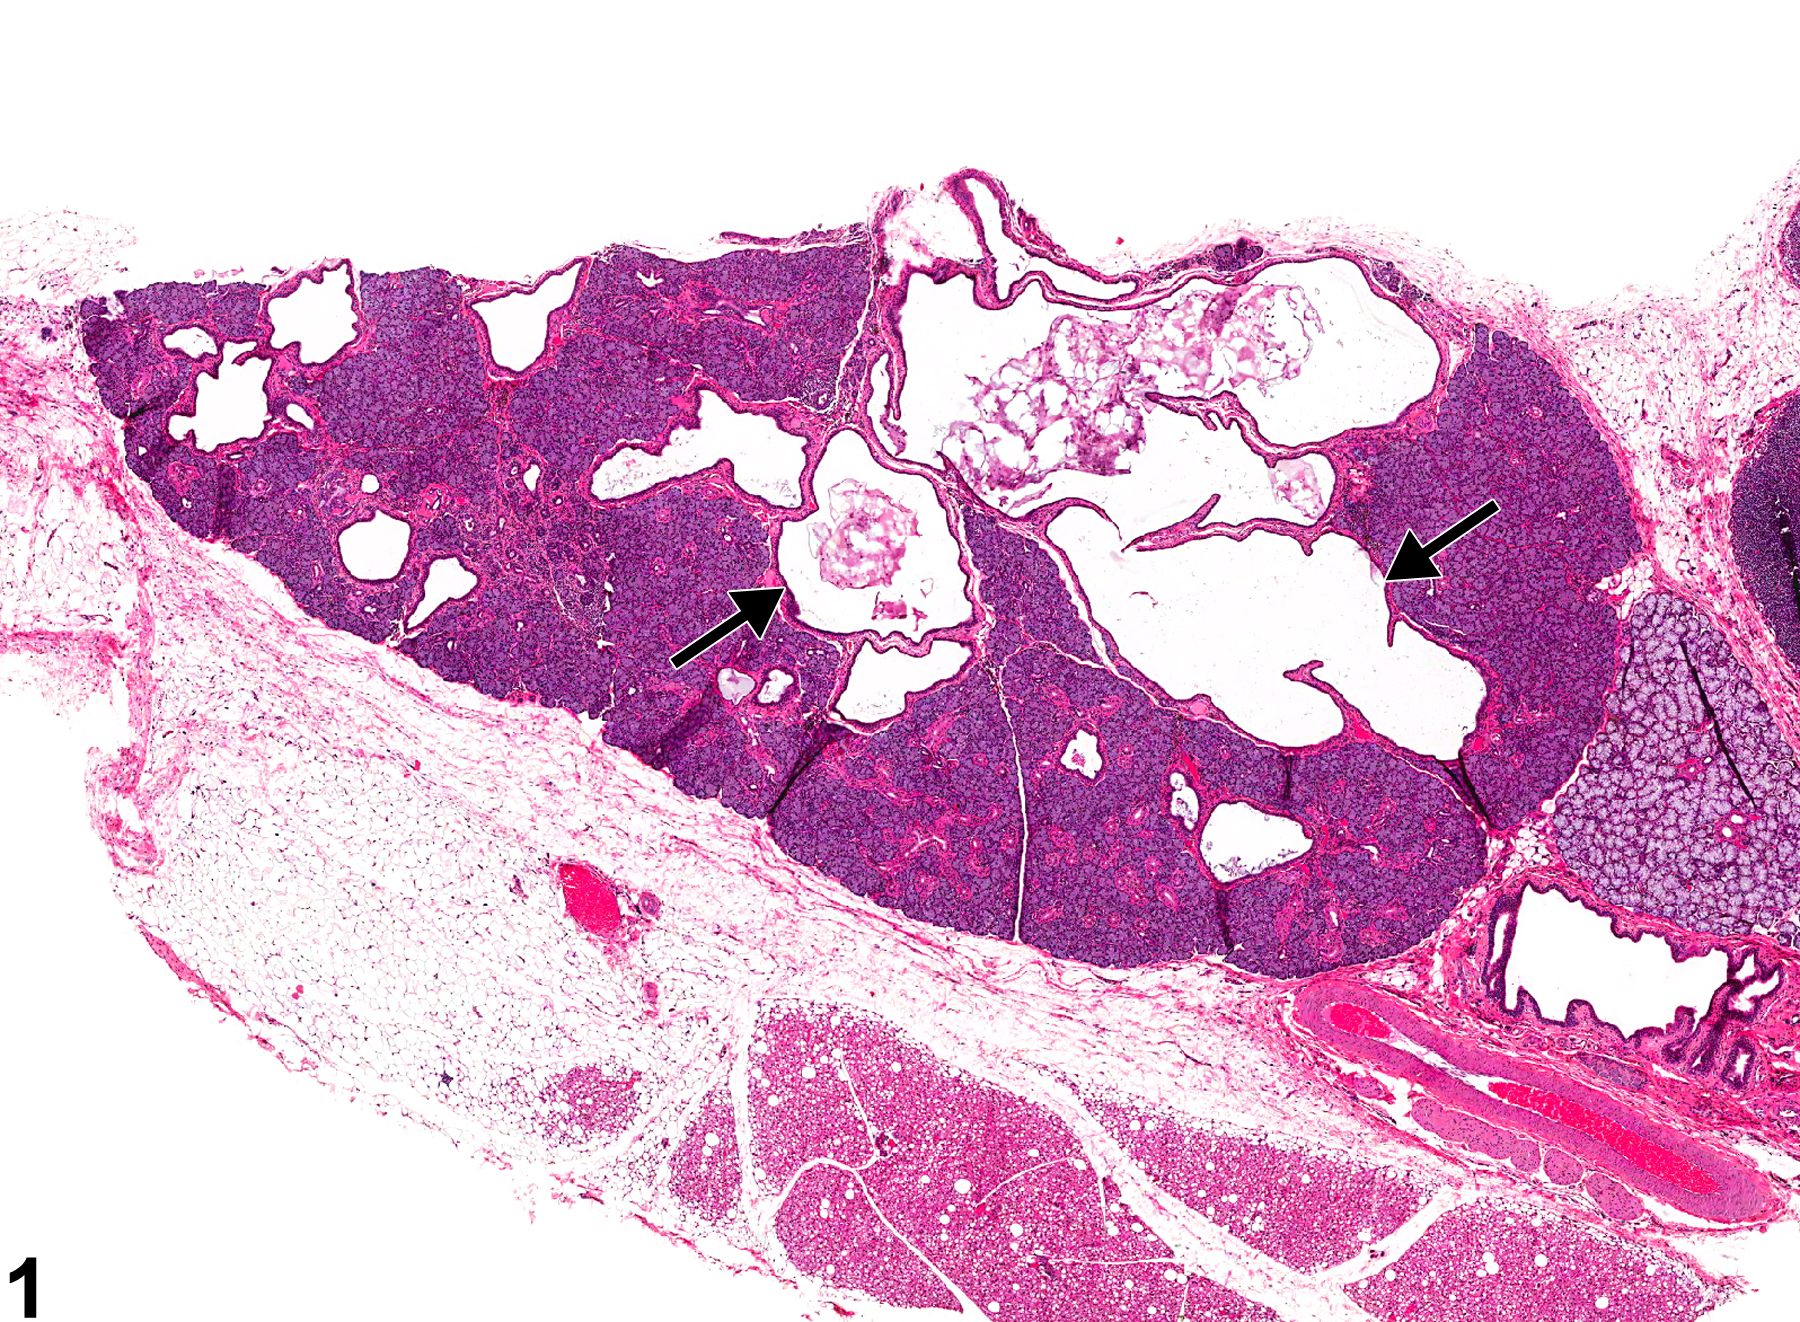 Image of dilation in the salivary gland duct from a female F344/N rat in a chronic study